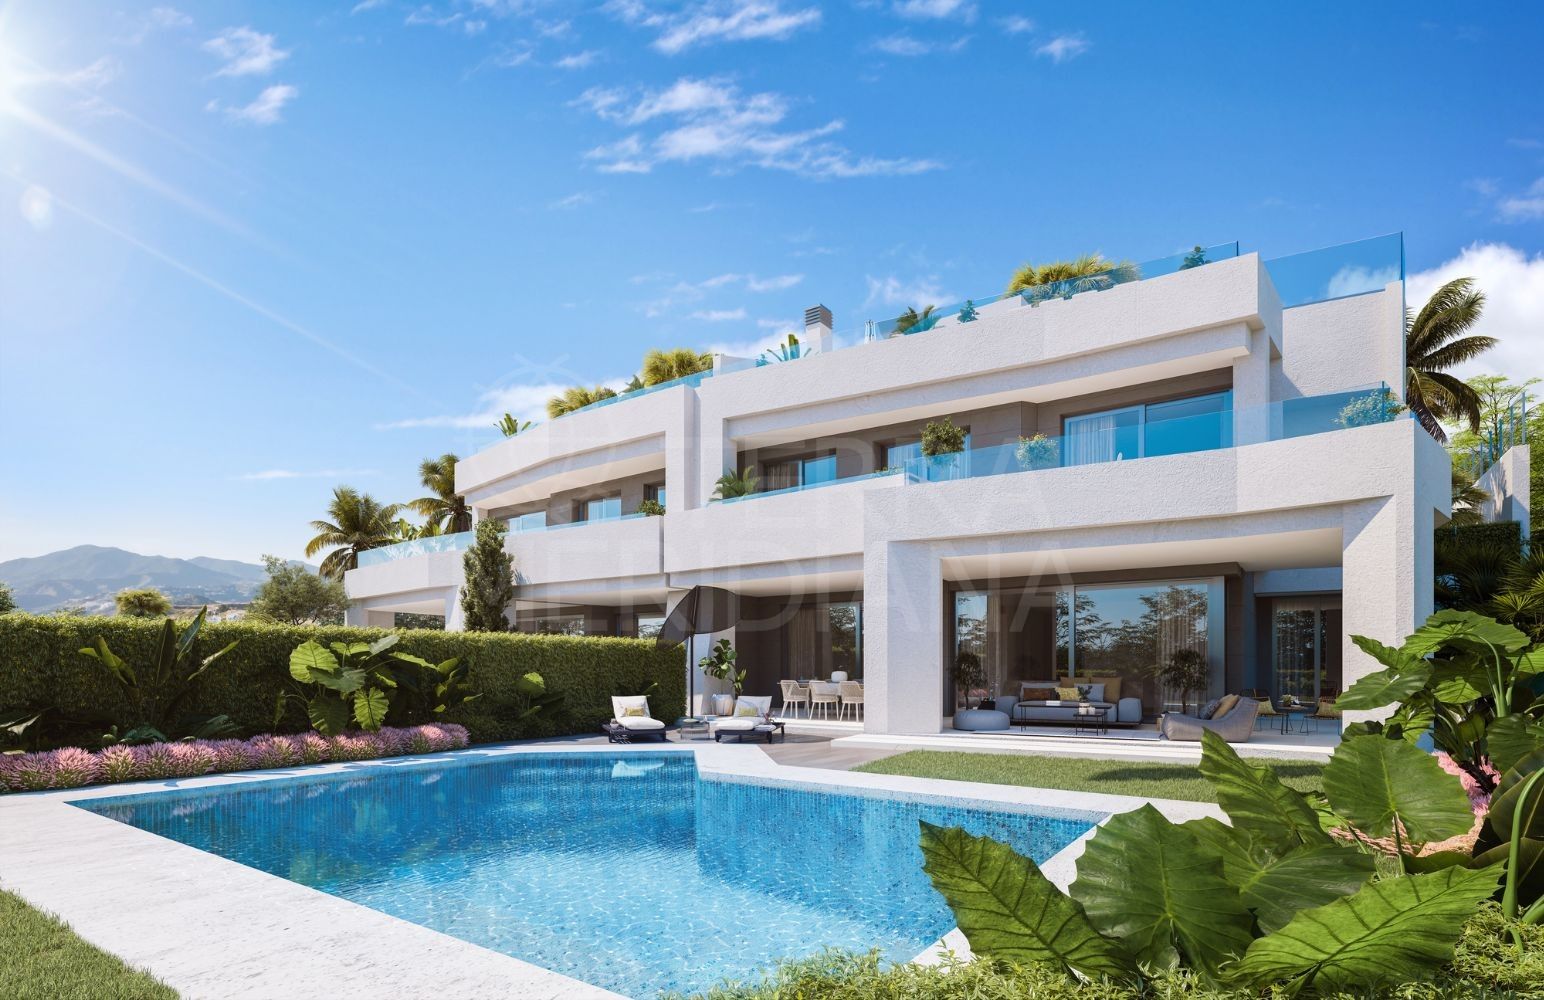 Off-plan semi-detached luxury townhouse with private pool for sale in Soul Marbella, Santa Clara